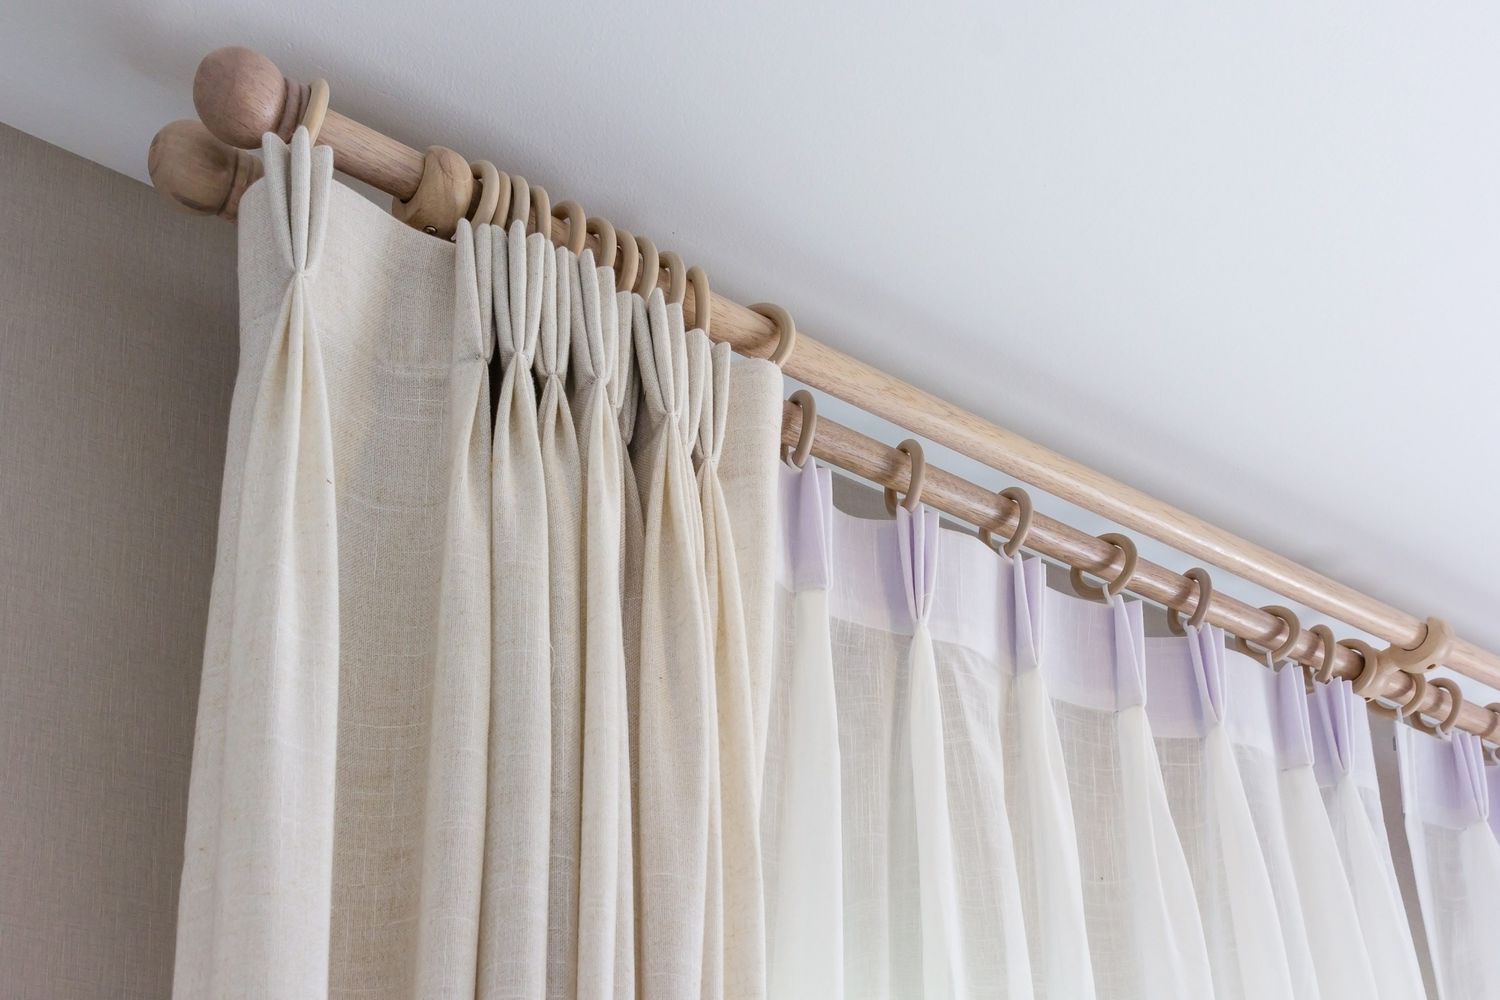 How Do You Hang Pinch Pleat Curtains